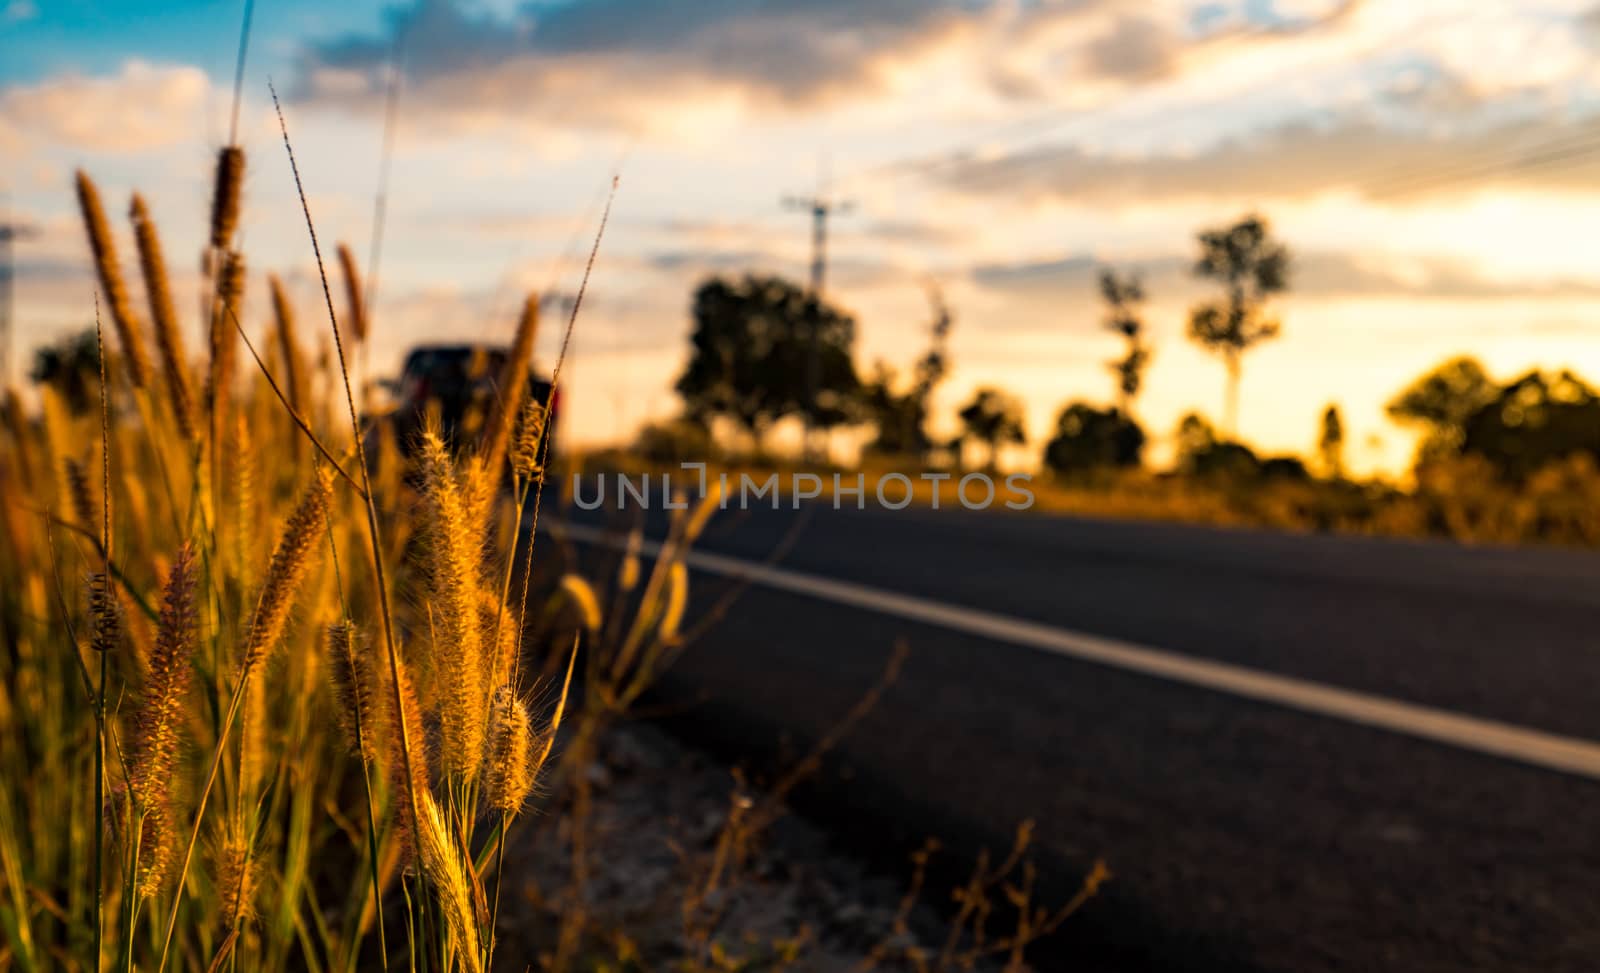 Flower of grass with blurred background of asphalt road, blue sky, white clouds and electric pole at countryside in Thailand